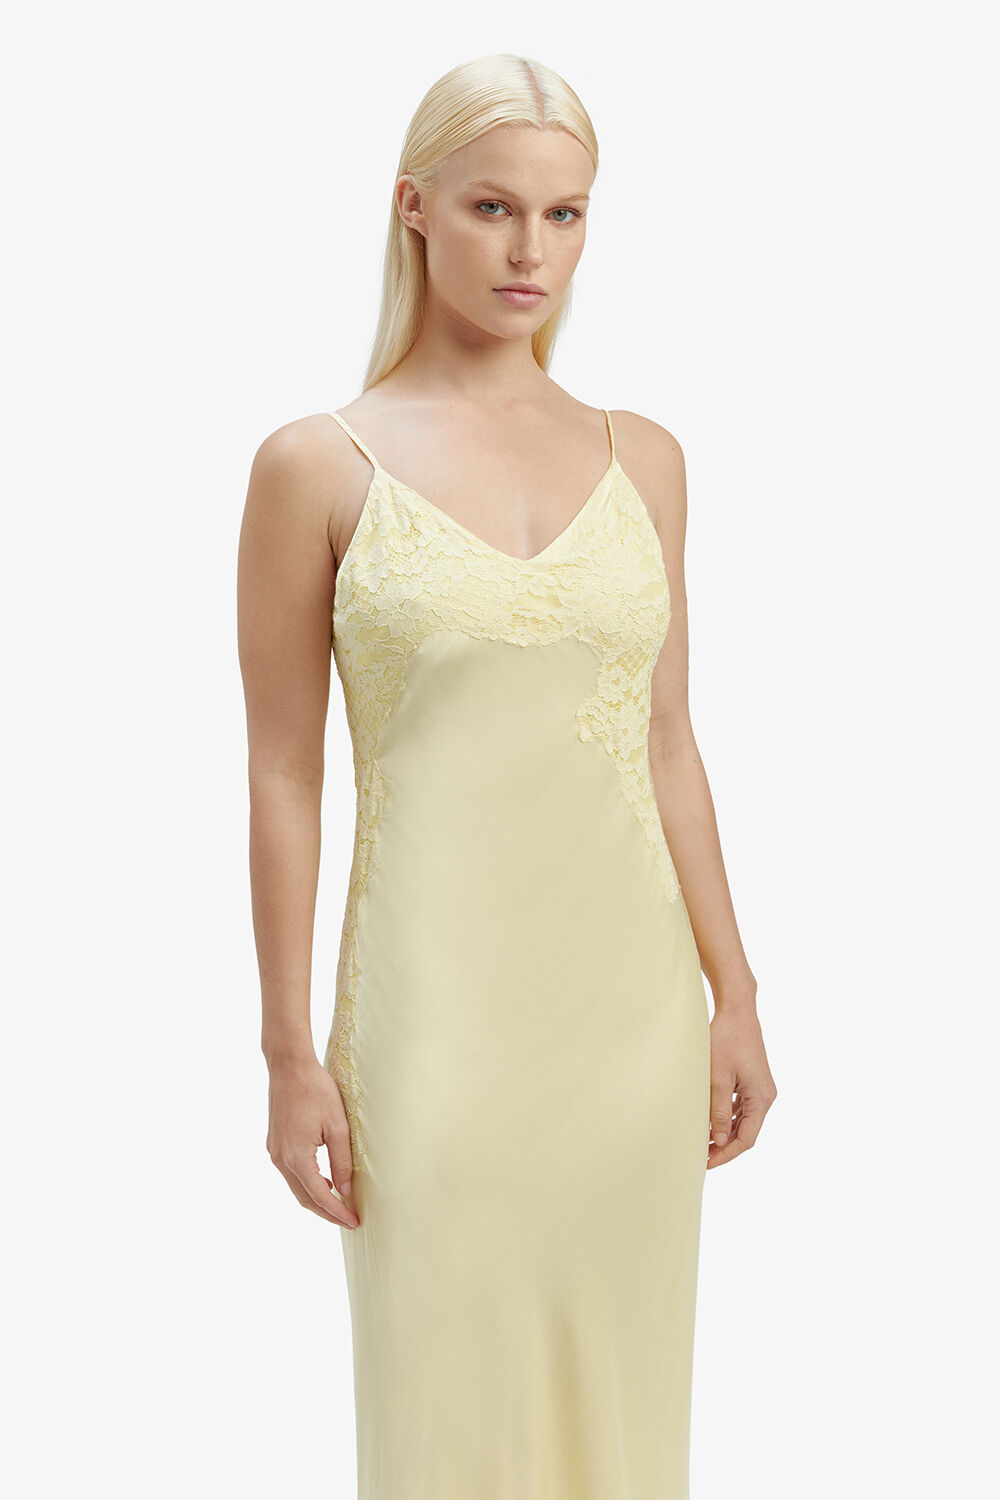 AVOCO LACE DETAIL MIDI DRESS in colour LIMELIGHT